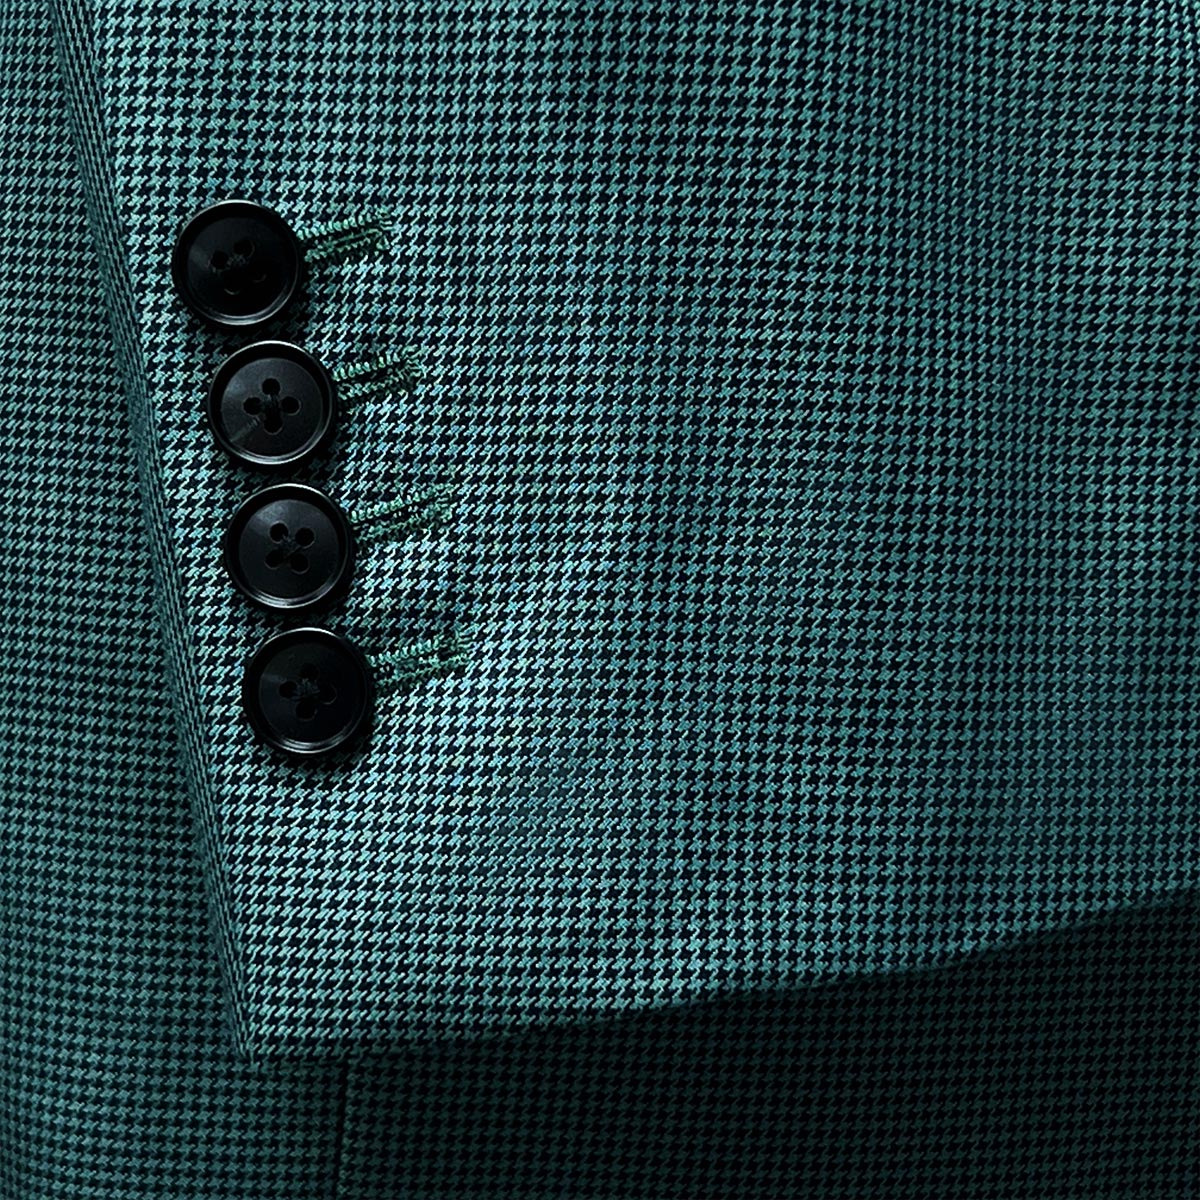 Close-up of the 100% Australian Merino Wool fabric in a sportcoat.